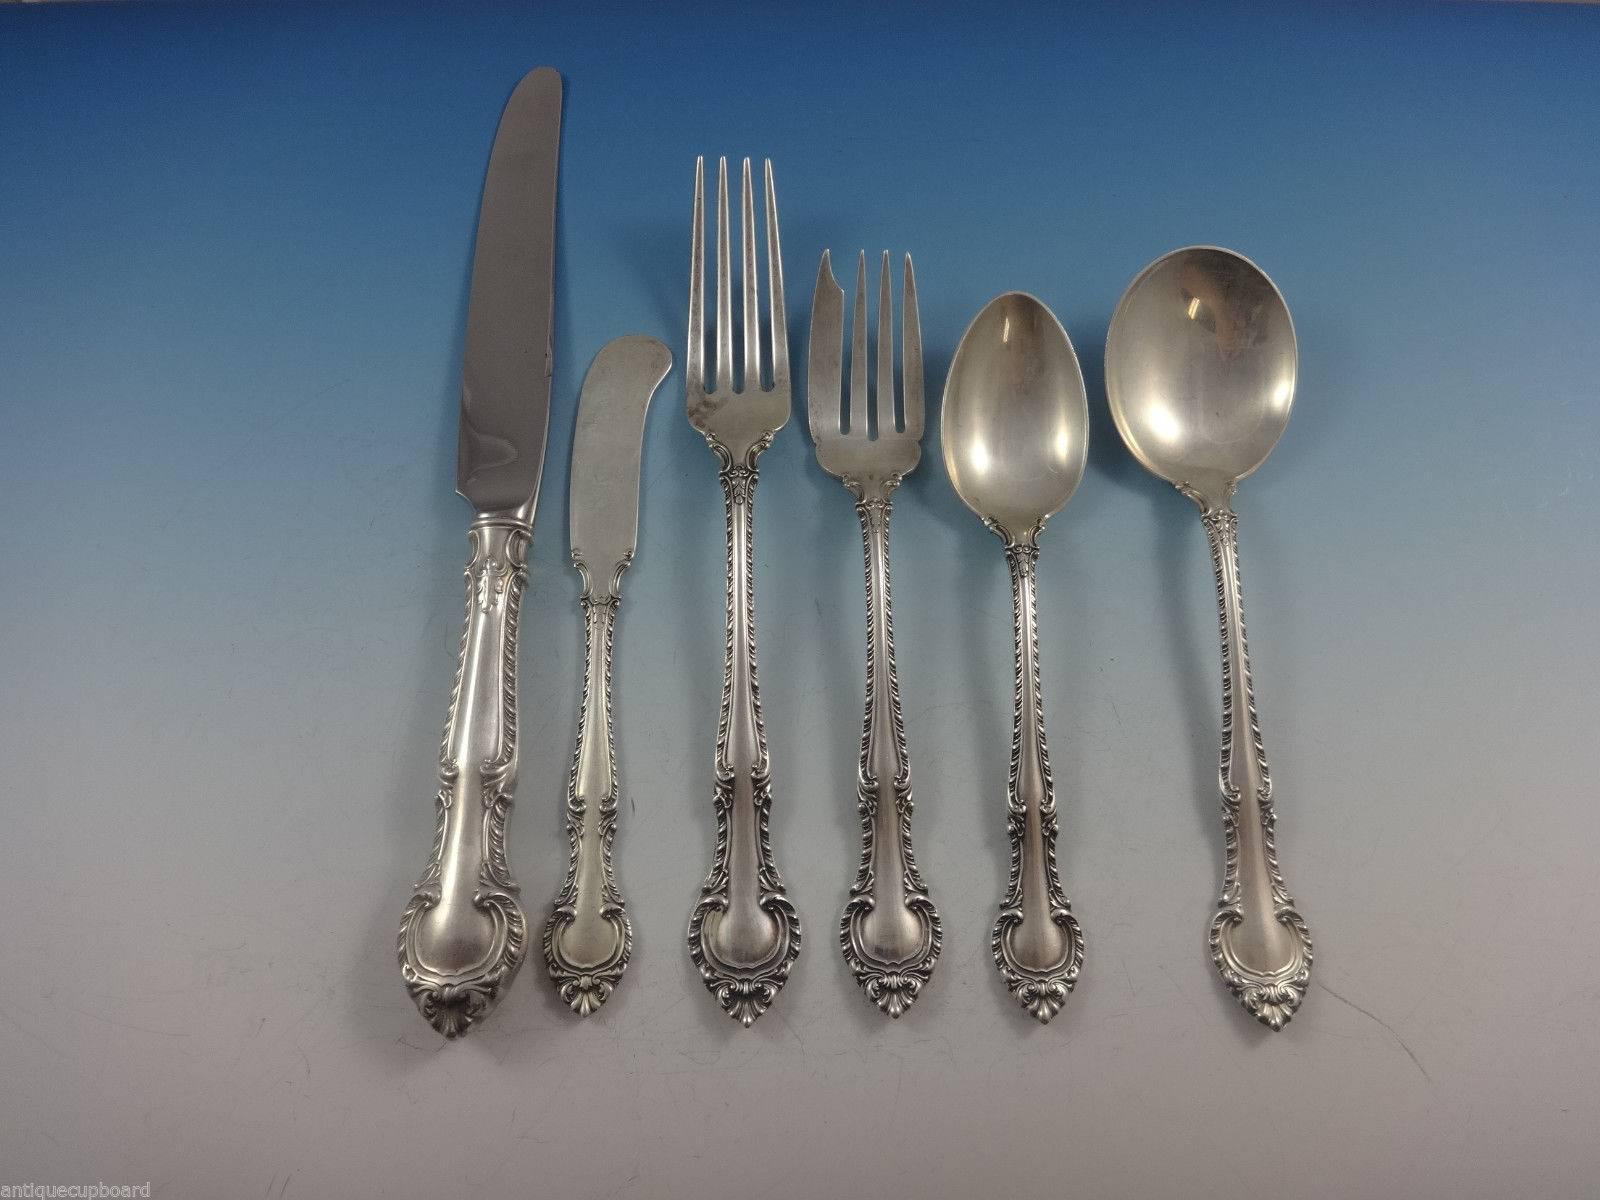 English Gadroon by Gorham Sterling Silver Flatware Set - 53 pieces. This set includes: 8 KNIVES, 8 7/8